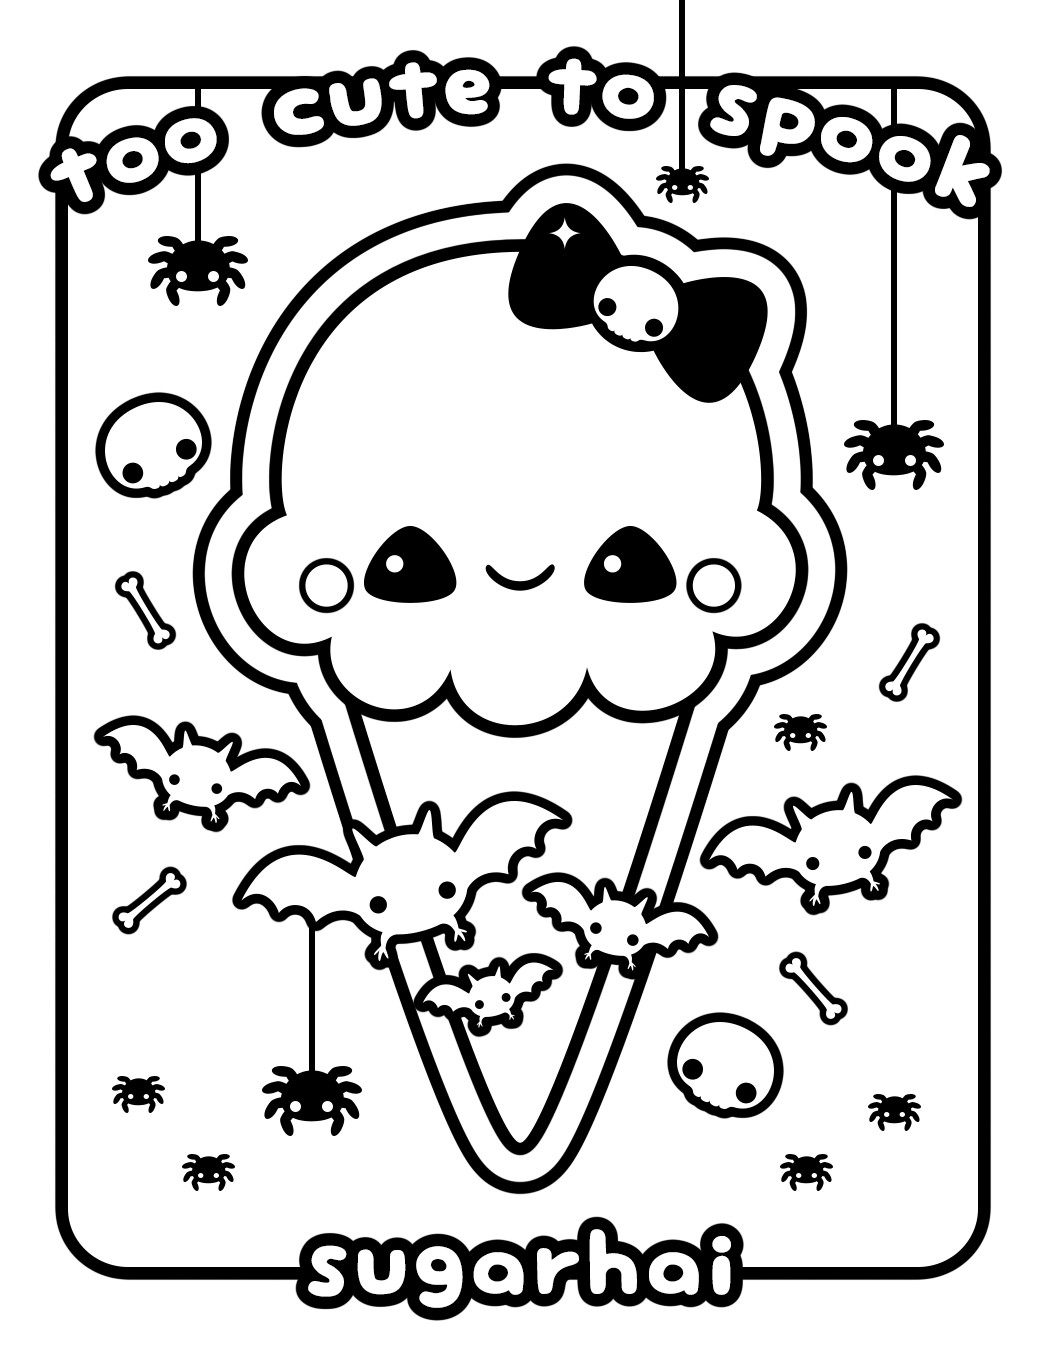 Cute Food Coloring Pages at GetColorings.com | Free printable colorings